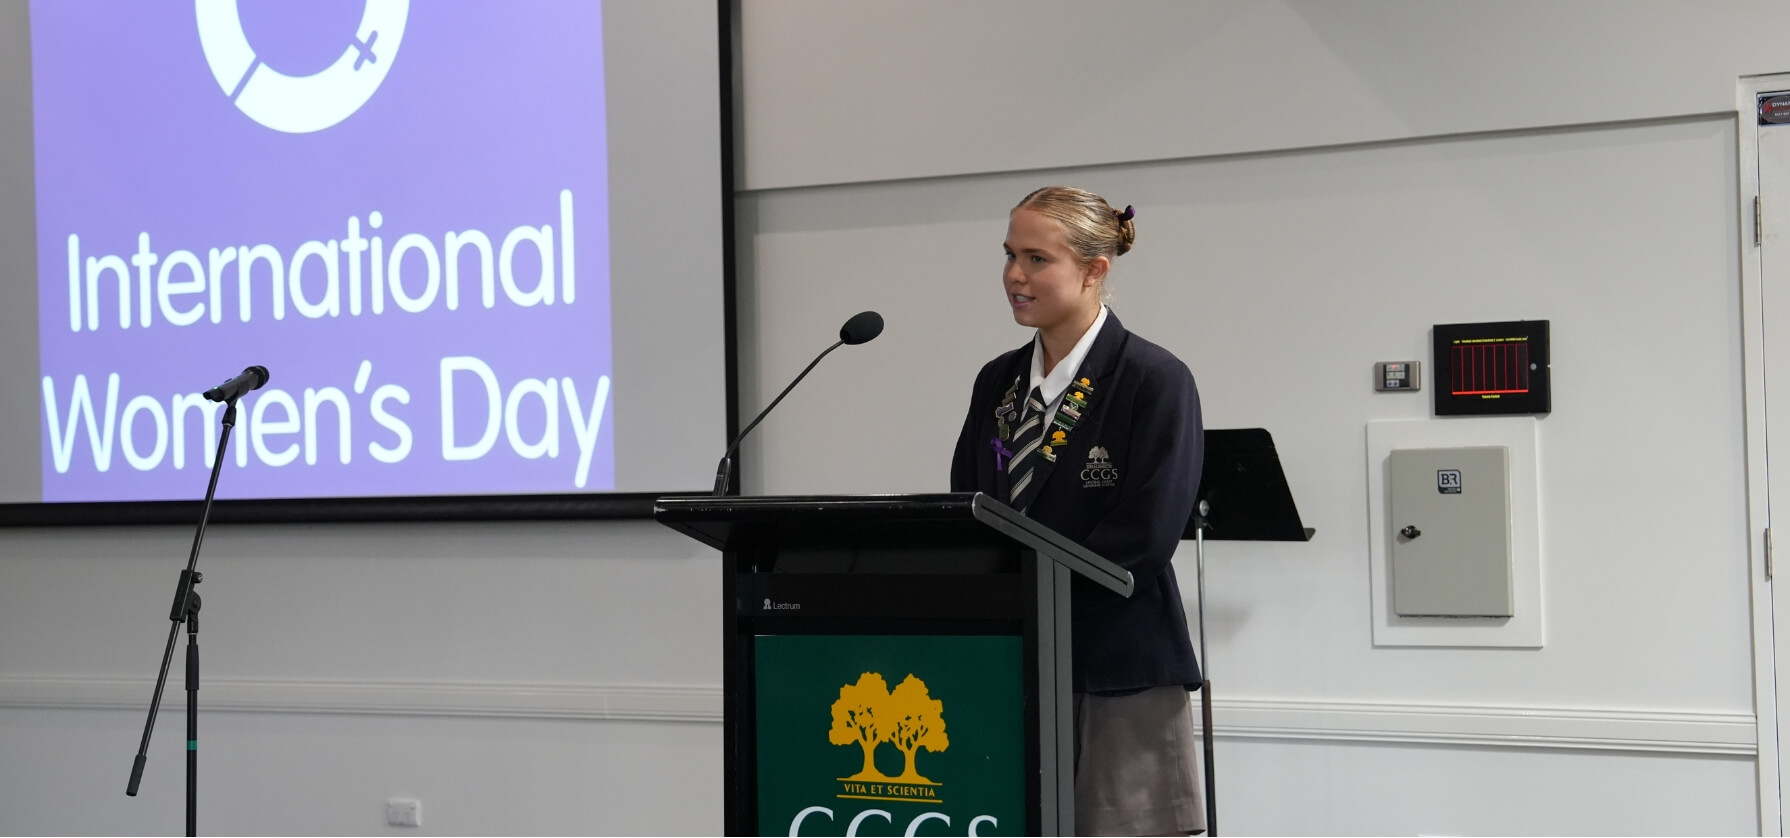 CCGS Year 12 student Lana gives a moving speech